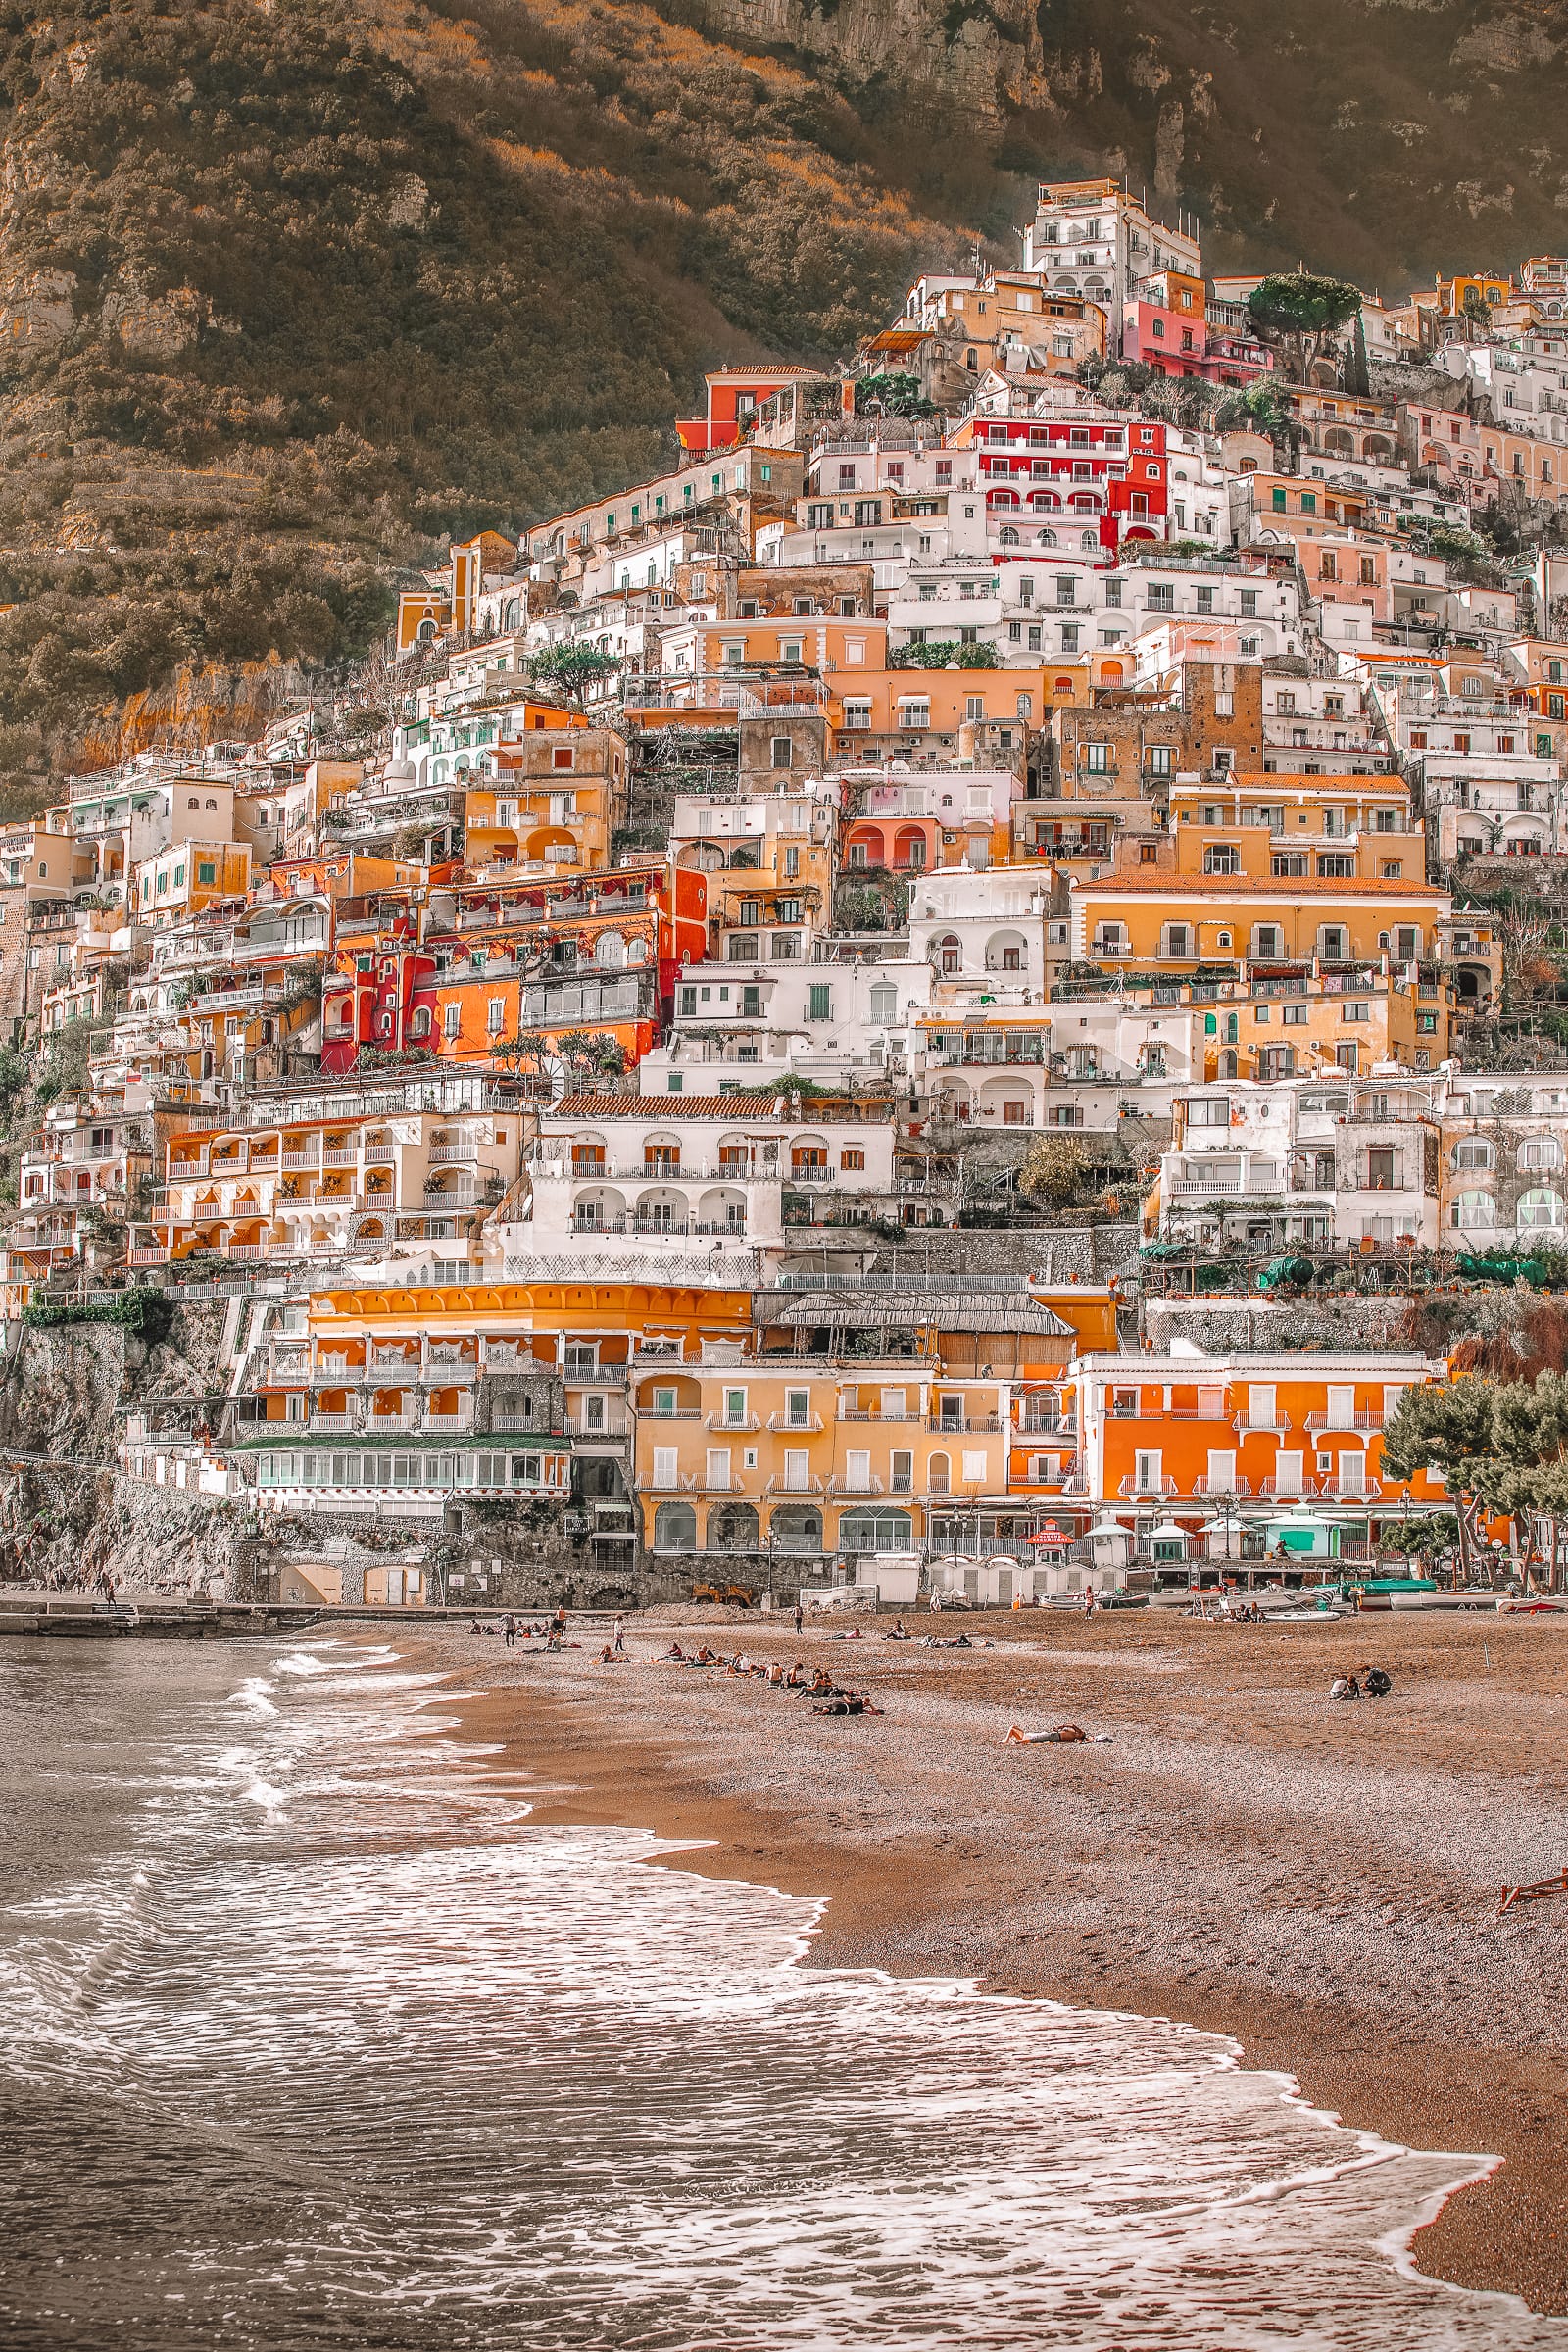 7 Reasons To Visit Positano, Italy - Hand Luggage Only ...